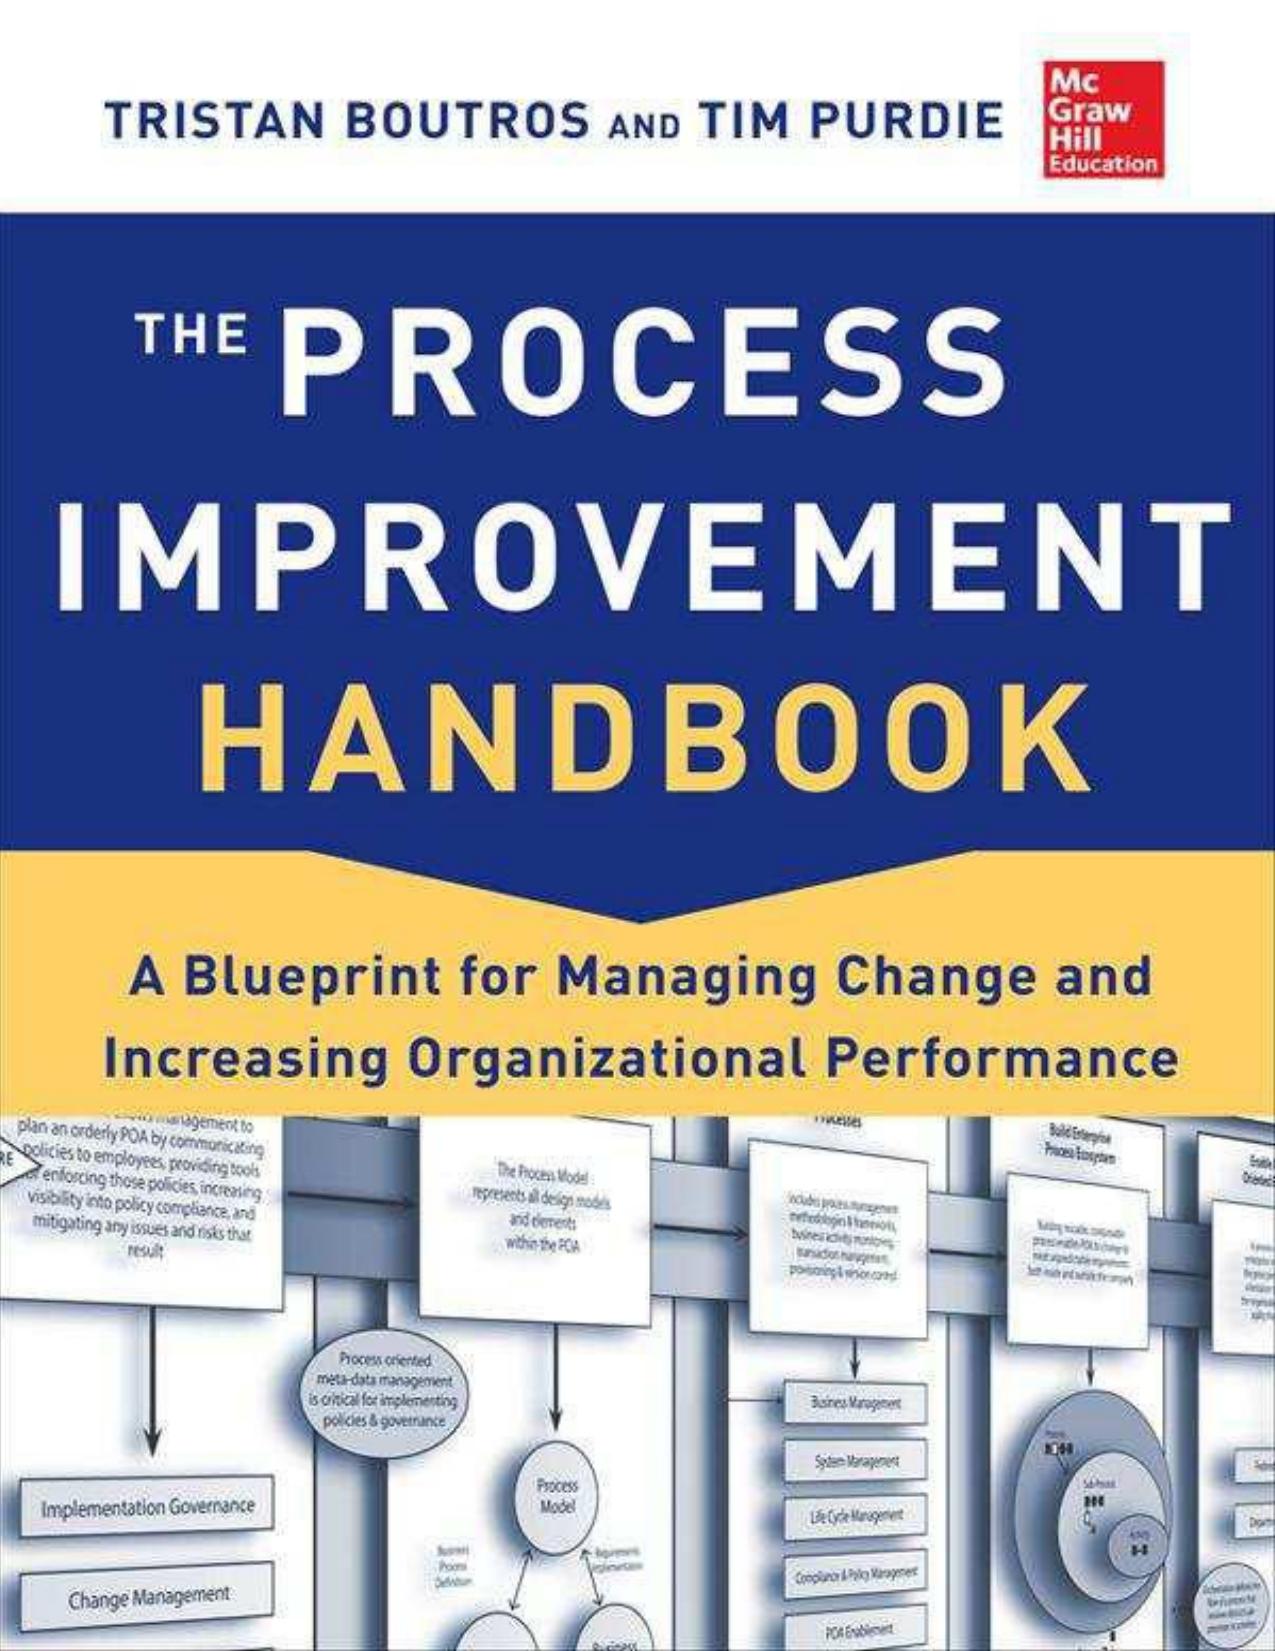 The Process Improvement Handbook: A Blueprint for Managing Change and Increasing Organizational Performance